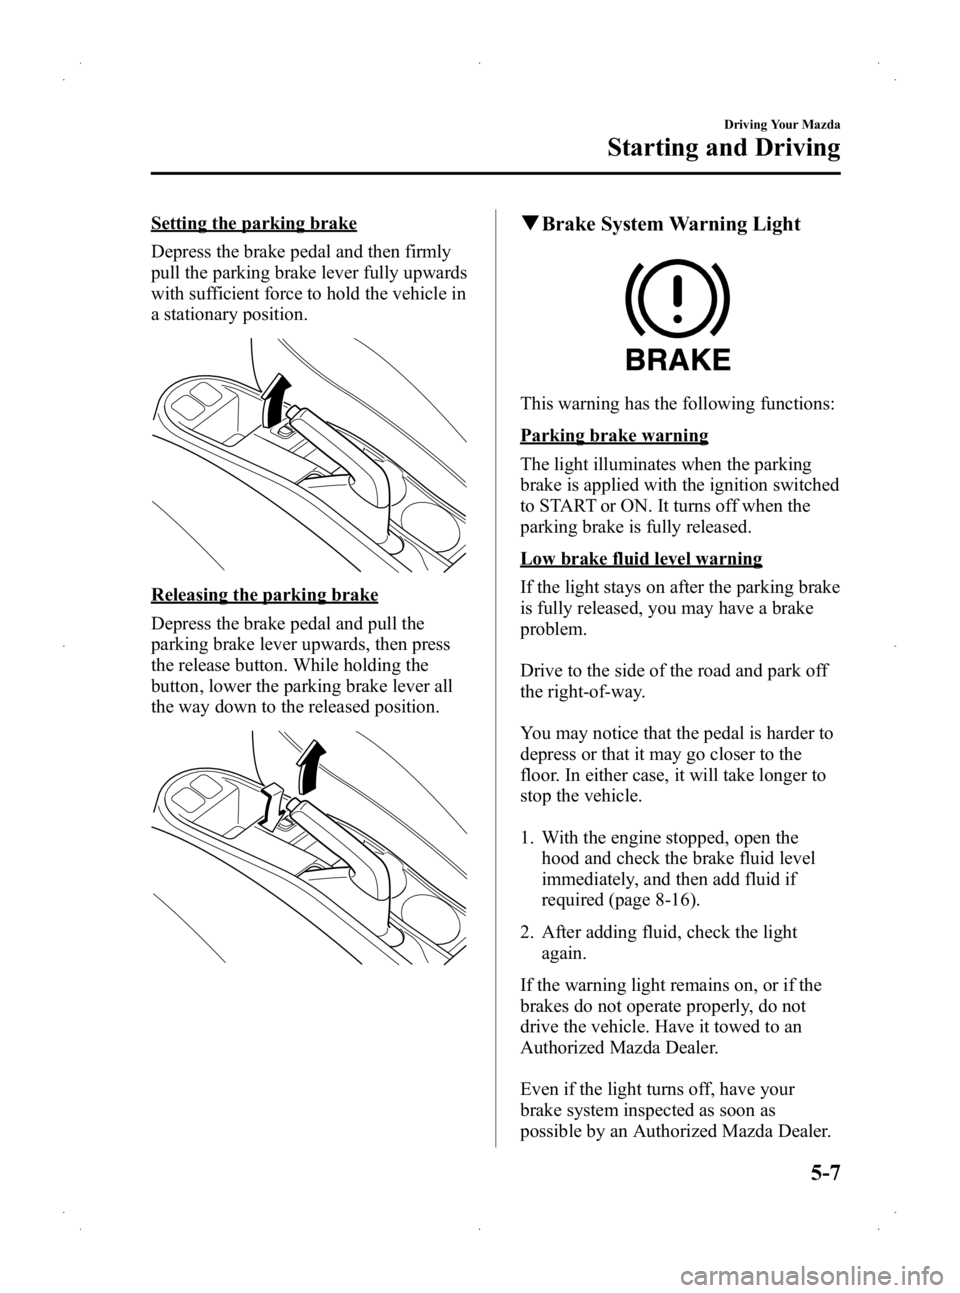 MAZDA MODEL 2 2013  Owners Manual Black plate (113,1)
Setting the parking brake
Depress the brake pedal and then firmly
pull the parking brake lever fully upwards
with sufficient force to hold the vehicle in
a stationary position.
Rel